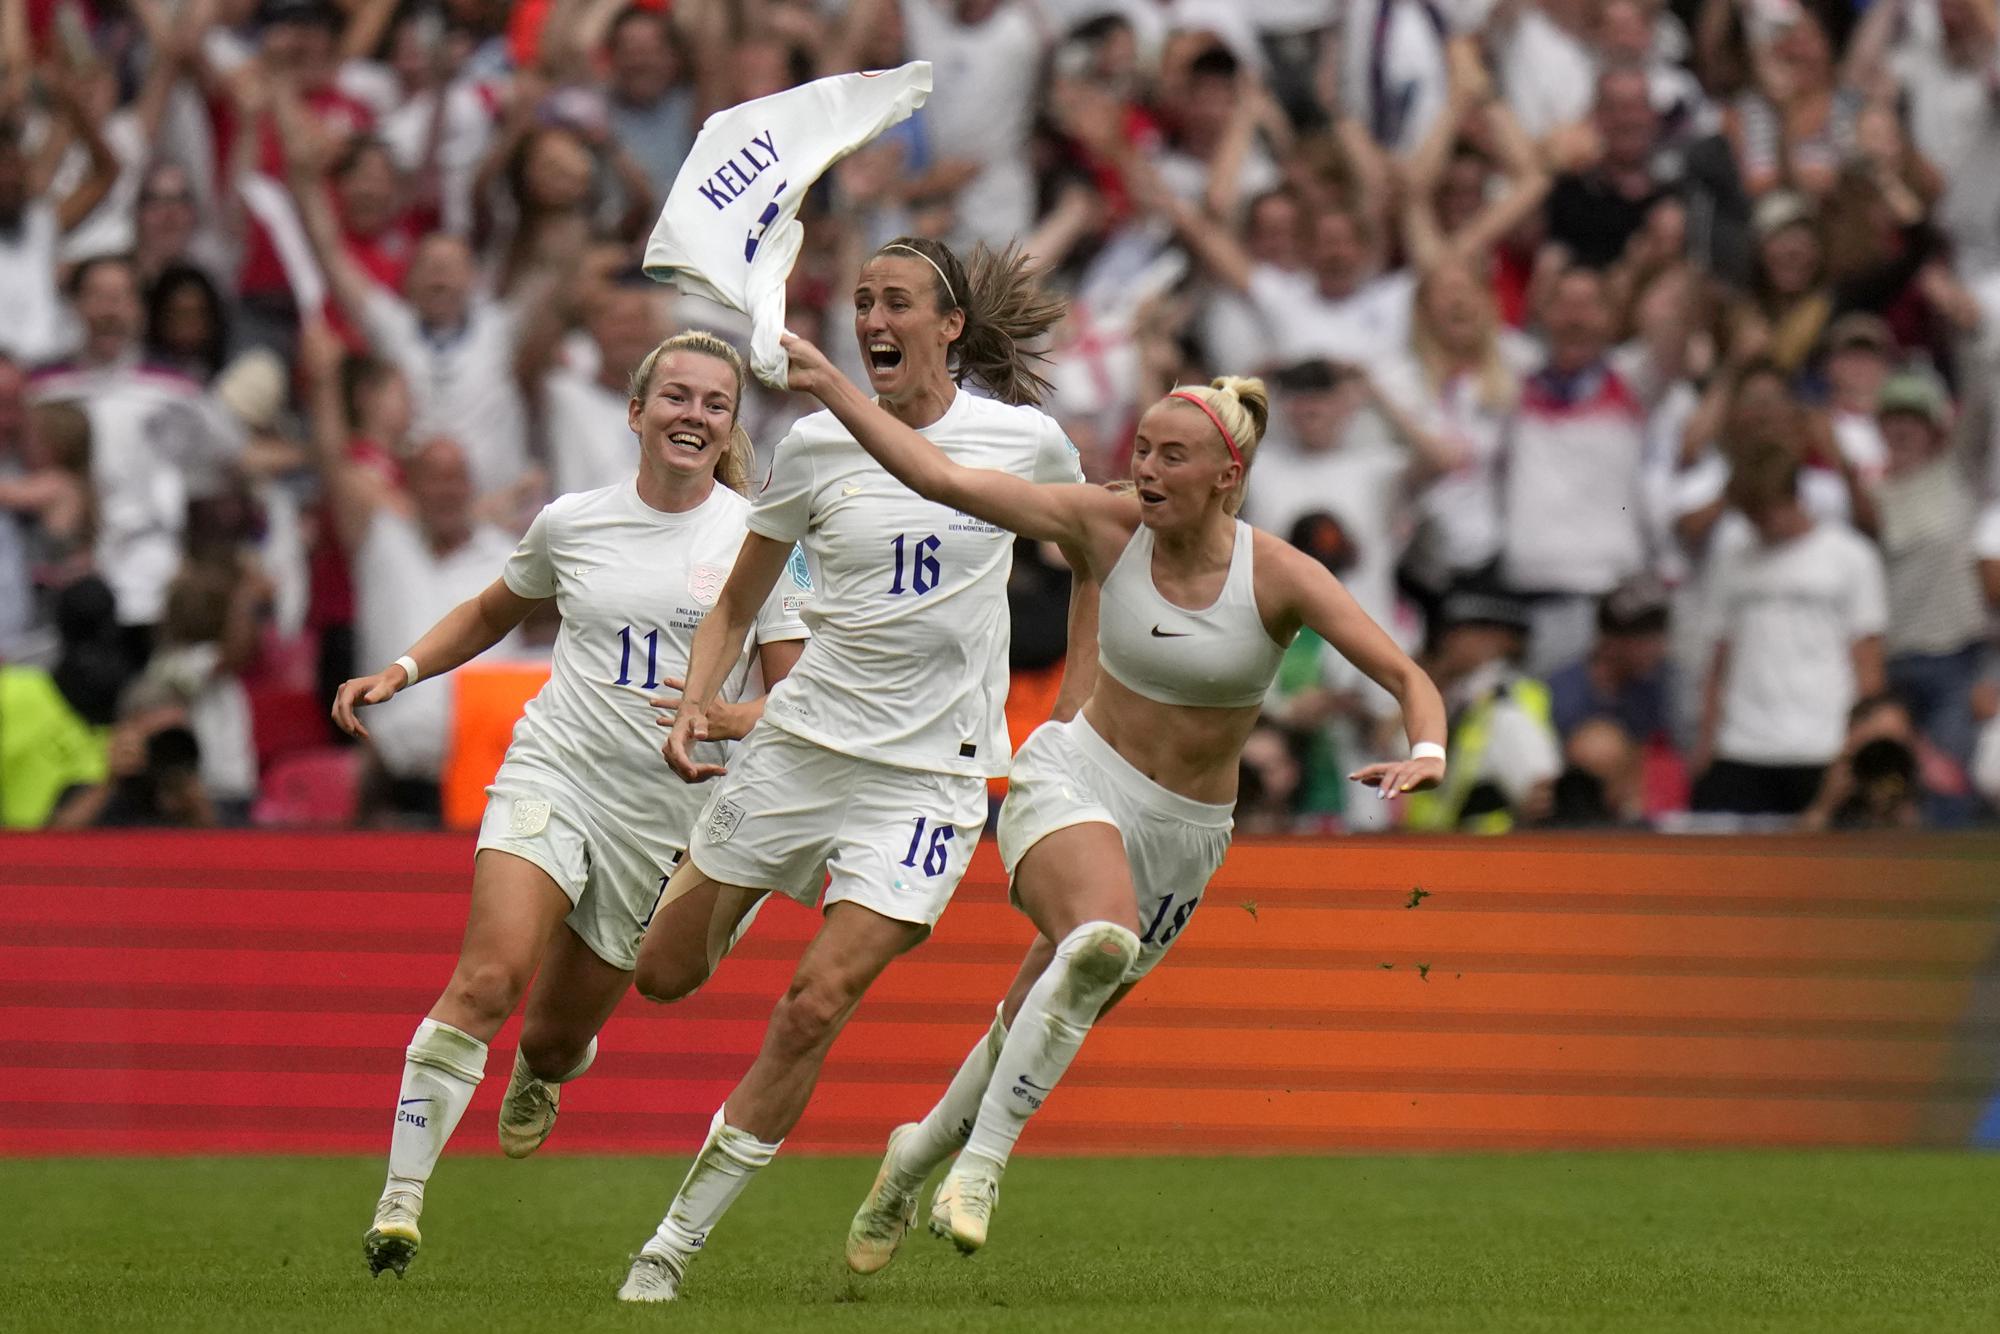 FILE - England's Chloe Kelly, right, celebrates after scoring her side's second goal during the Women's Euro 2022 final soccer match between England and Germany at Wembley stadium in London, Sunday, July 31, 2022. (AP Photo/Alessandra Tarantino, File)